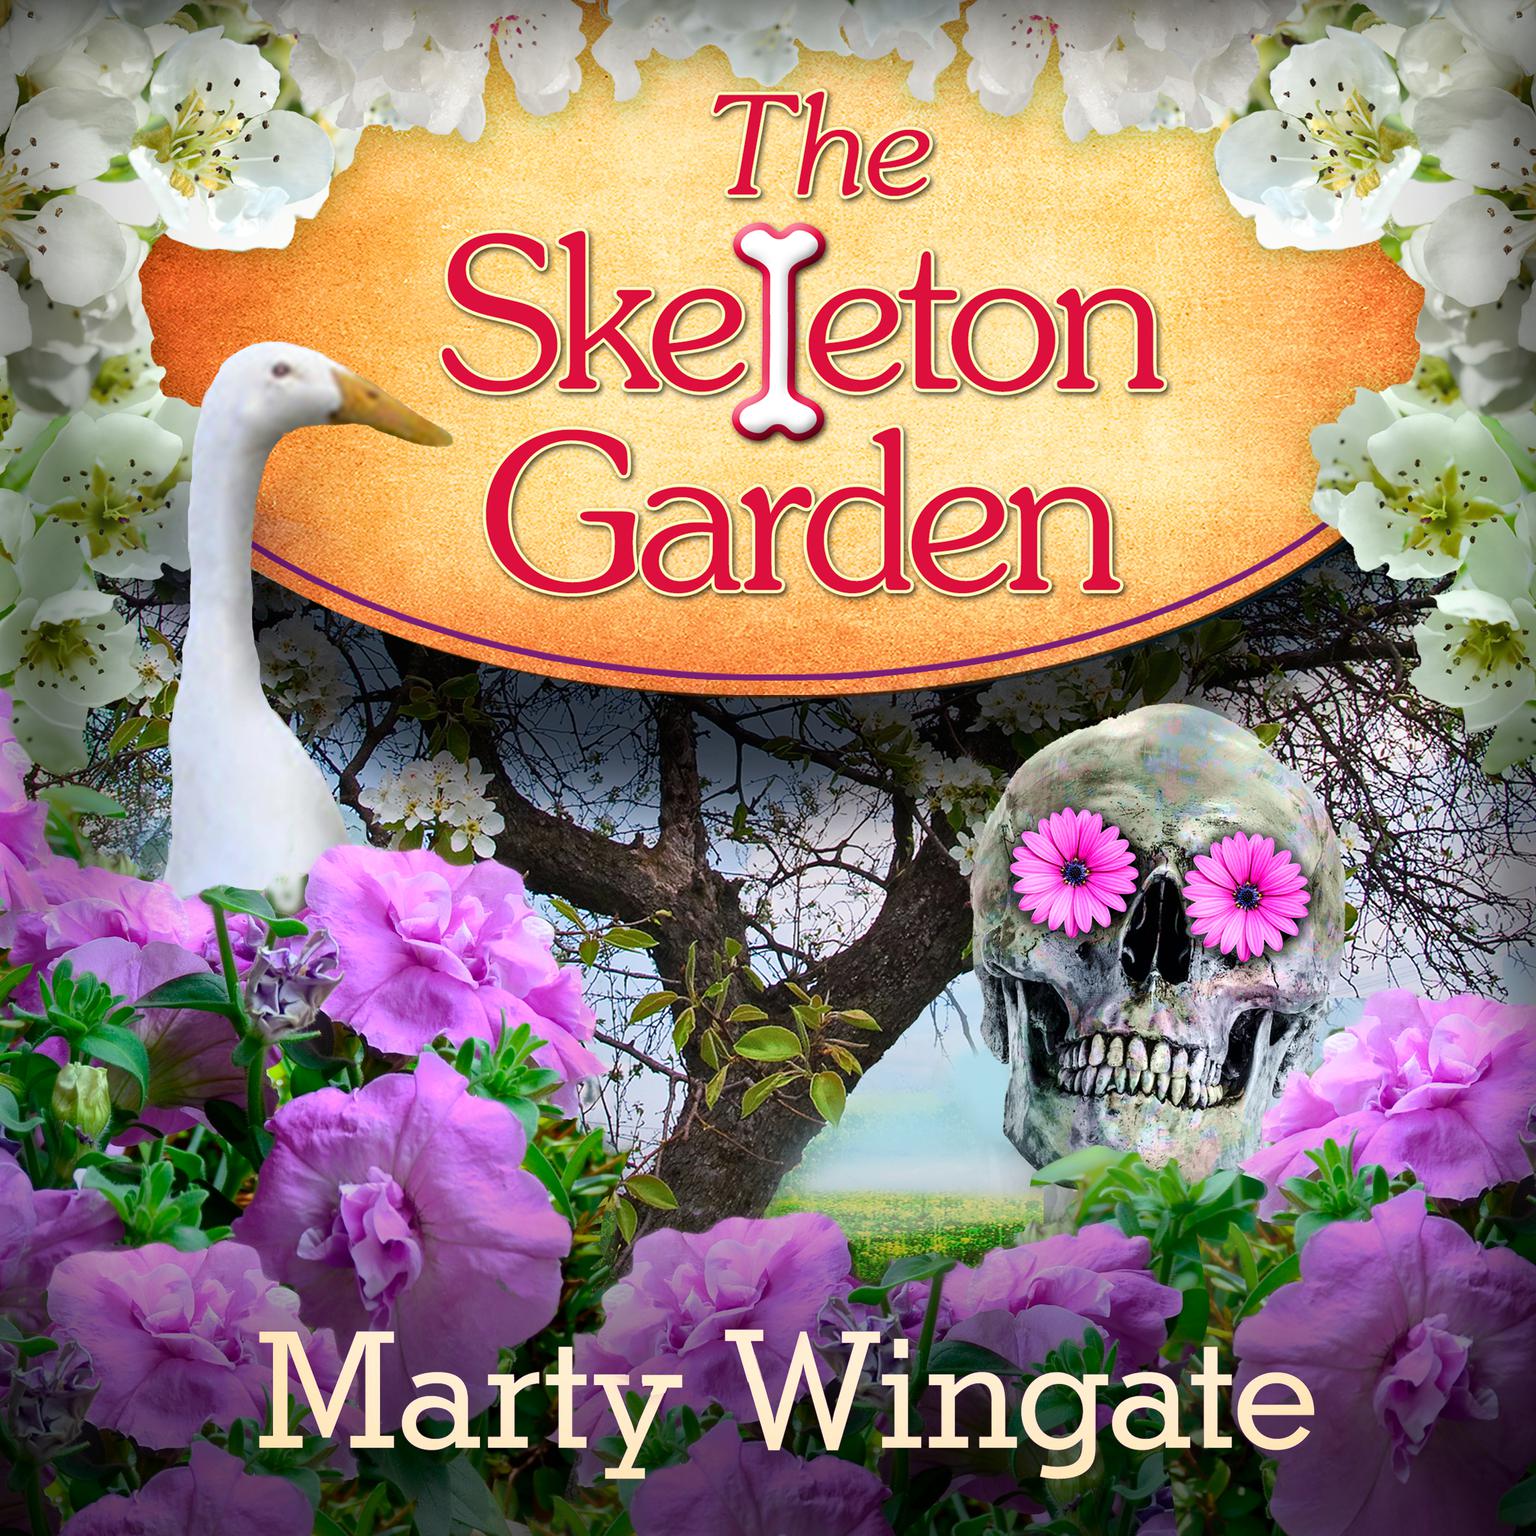 The Skeleton Garden Audiobook, by Marty Wingate